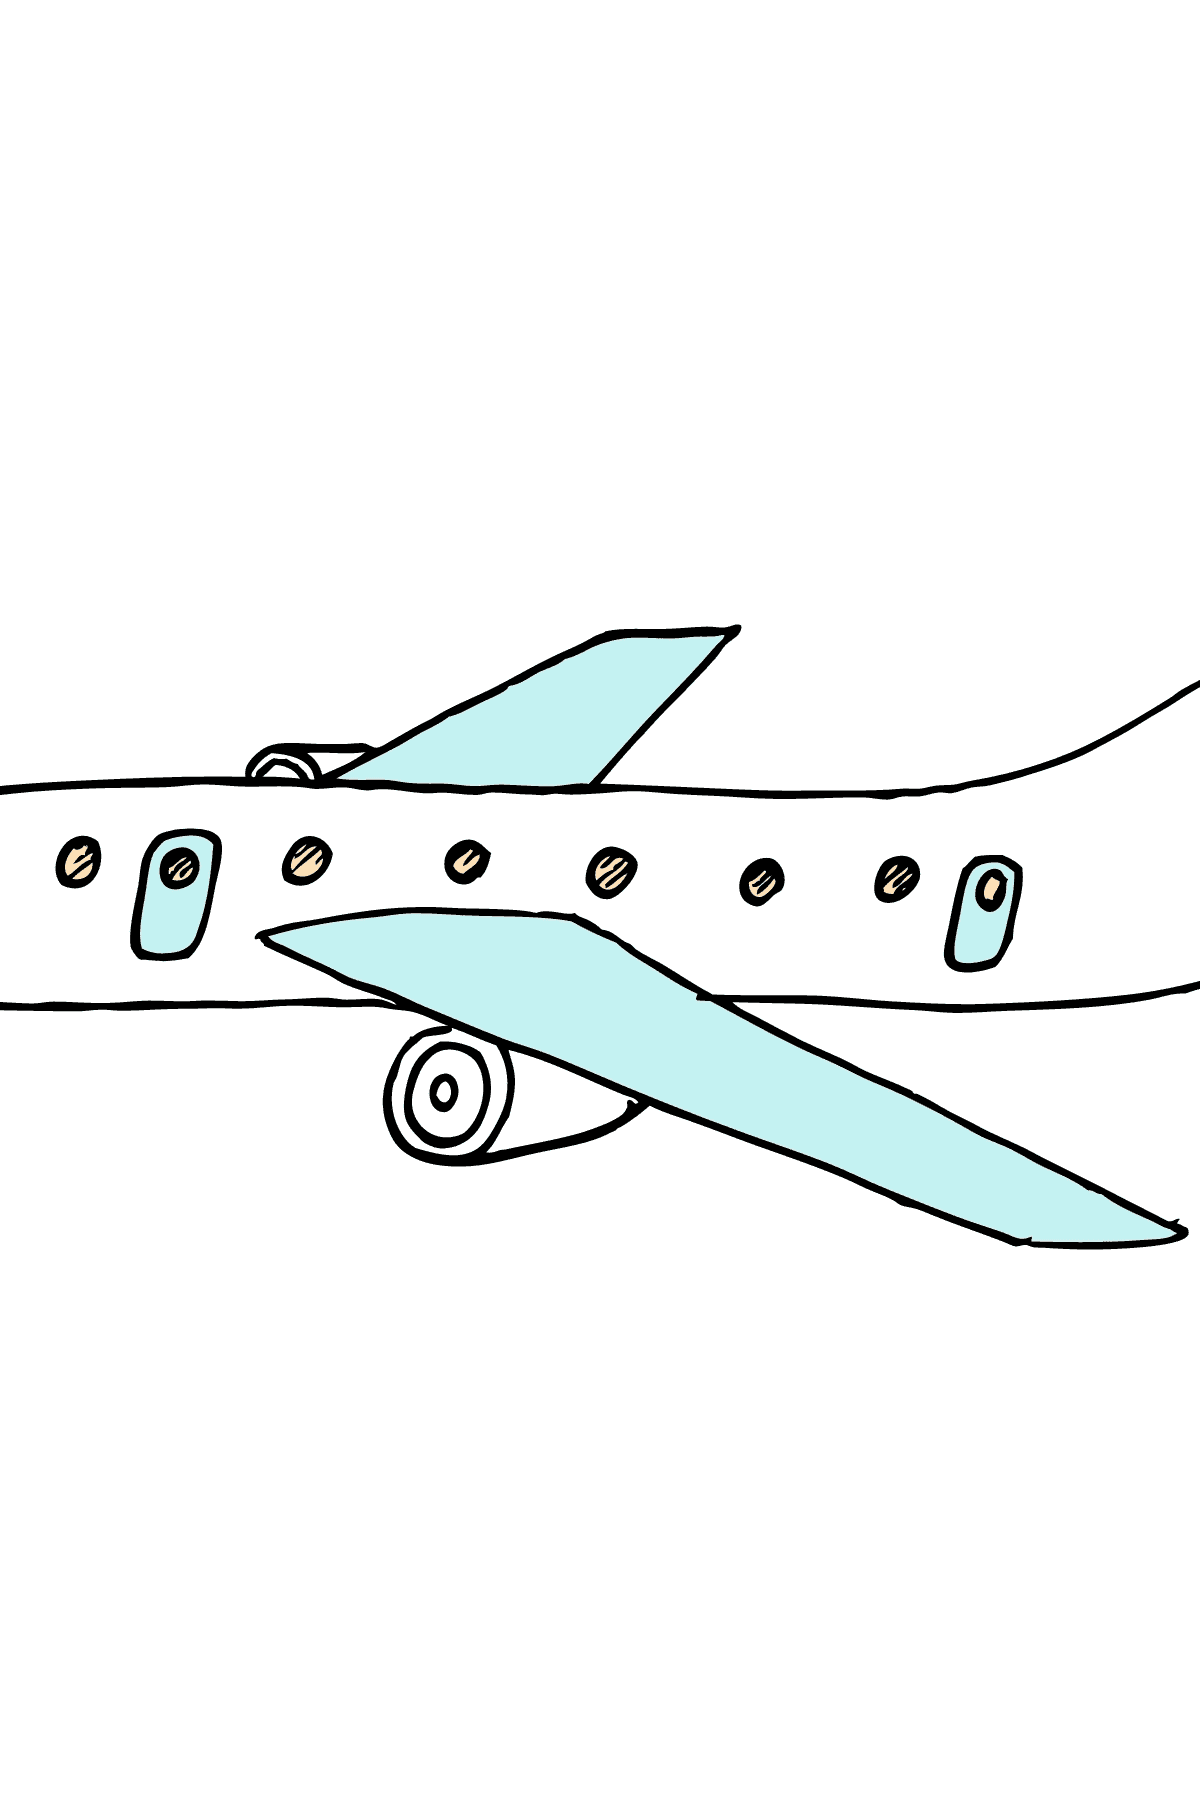 Commercial Jet Coloring Page - Coloring Pages for Kids